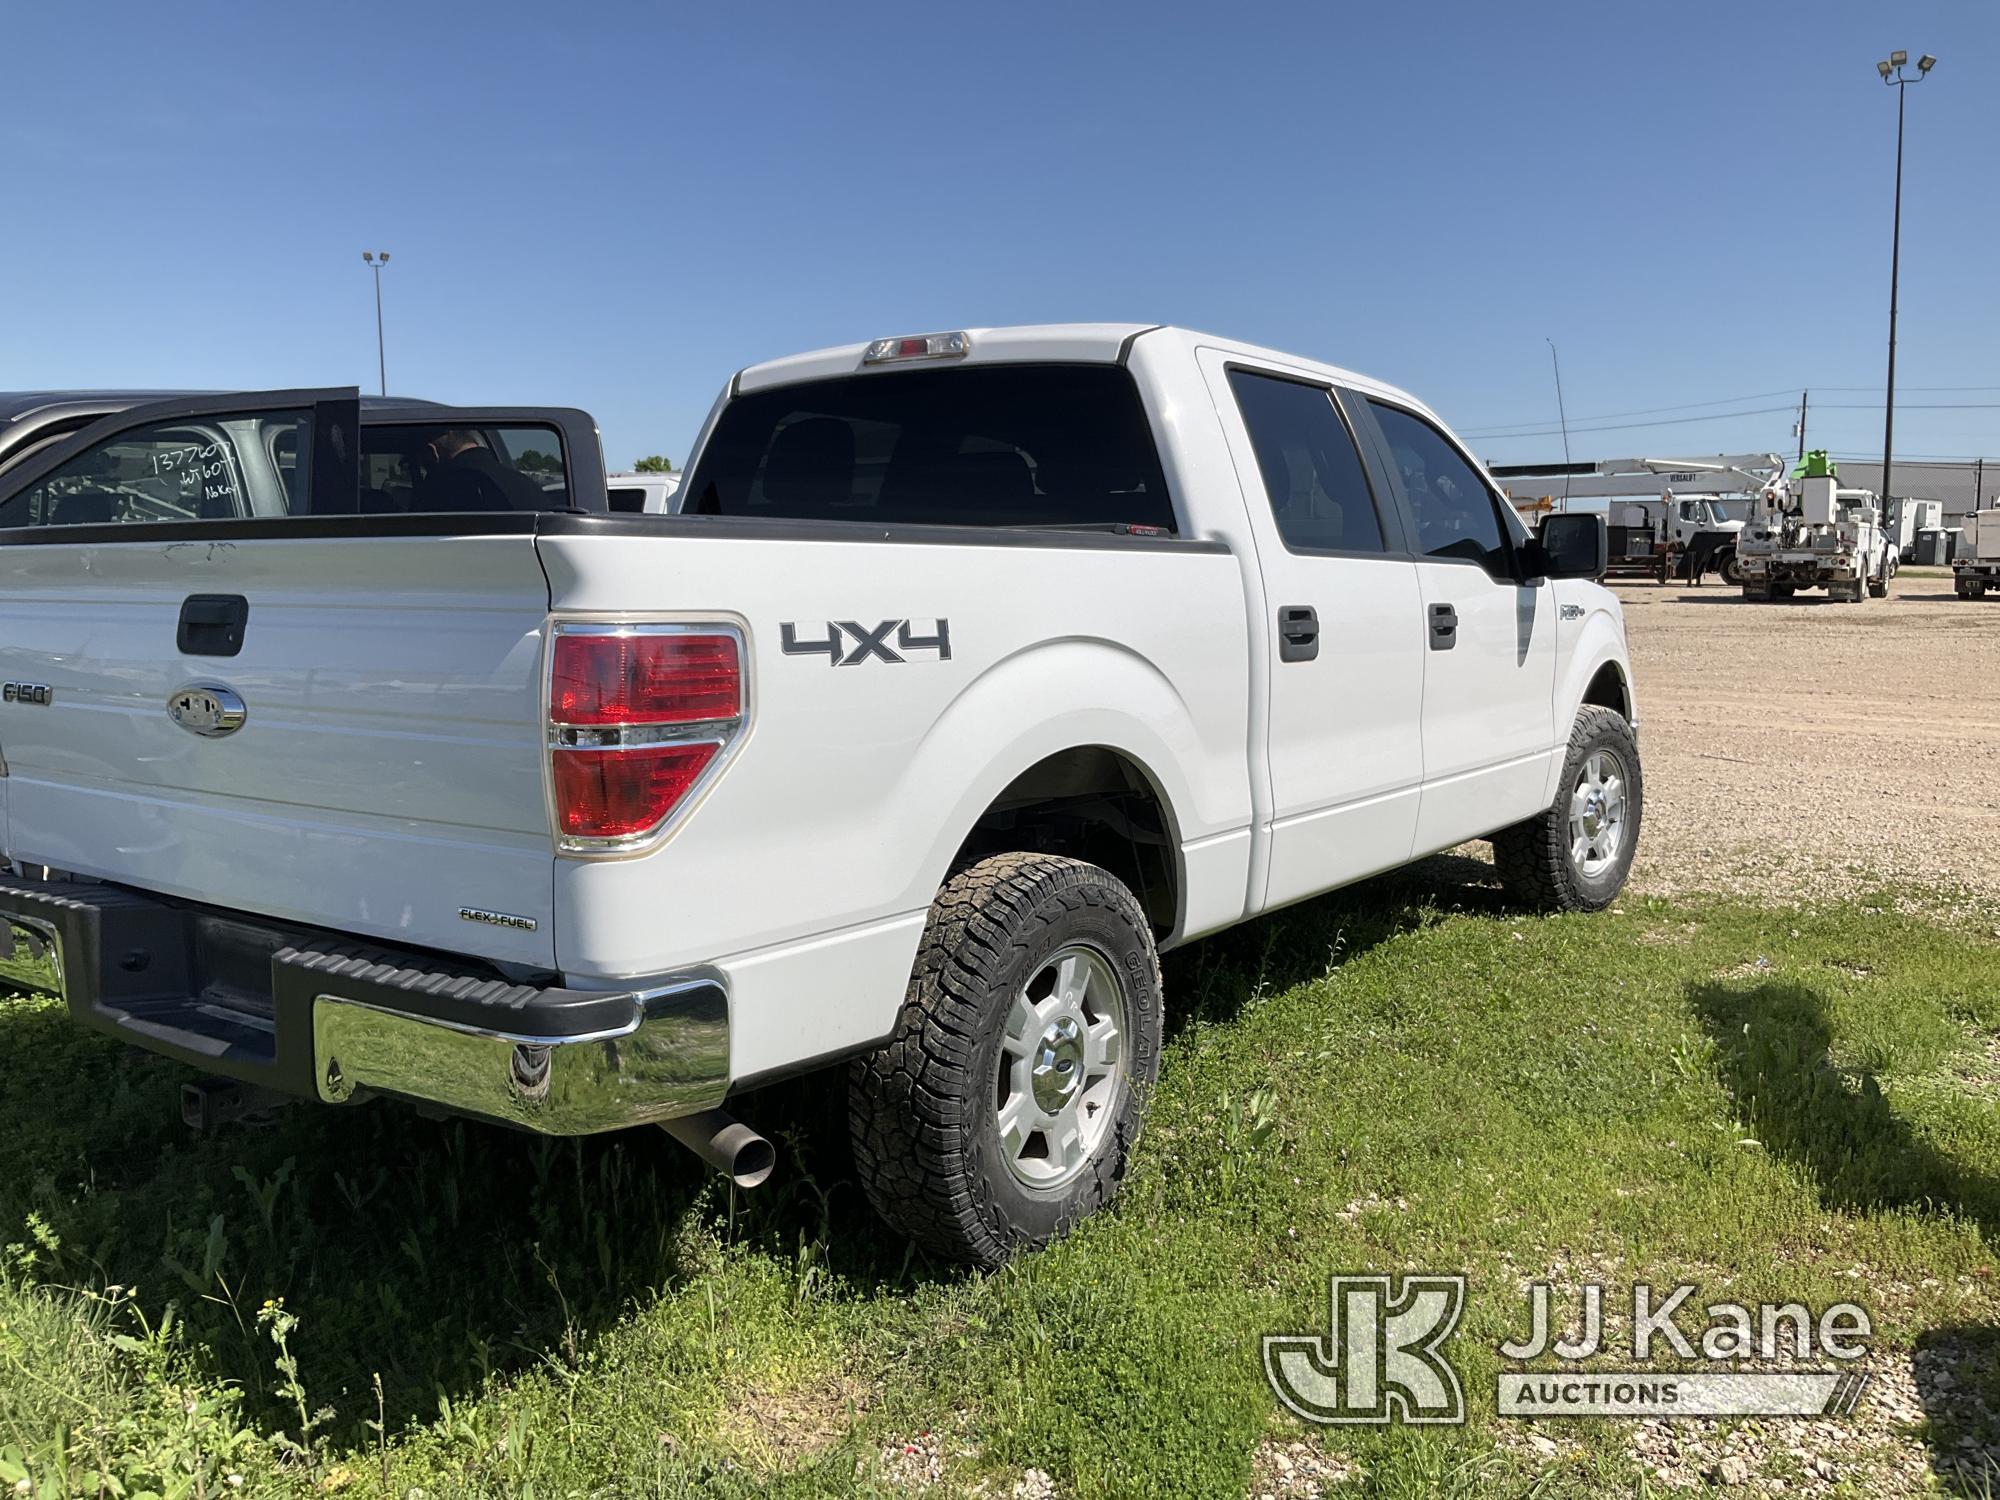 (Waxahachie, TX) 2014 Ford F150 4x4 Crew-Cab Pickup Truck Not Running, Condition Unknown